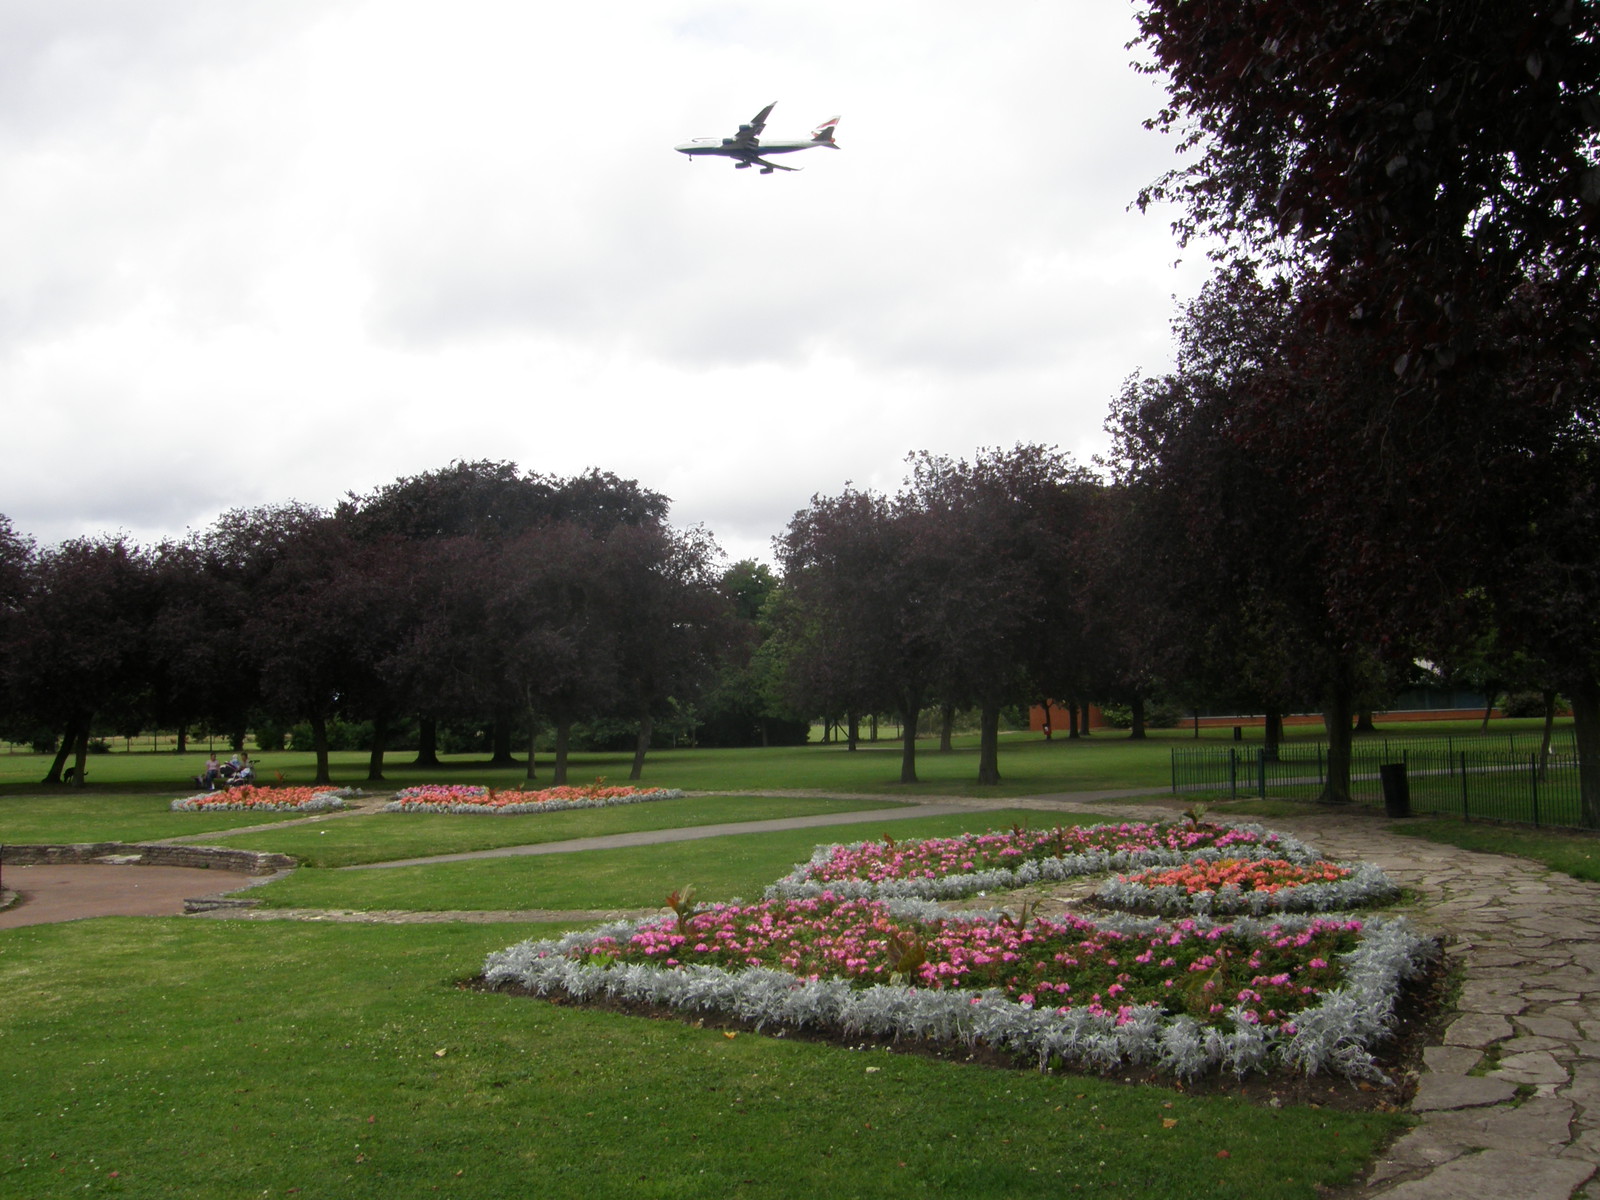 Low-flying planes over Lampton Park